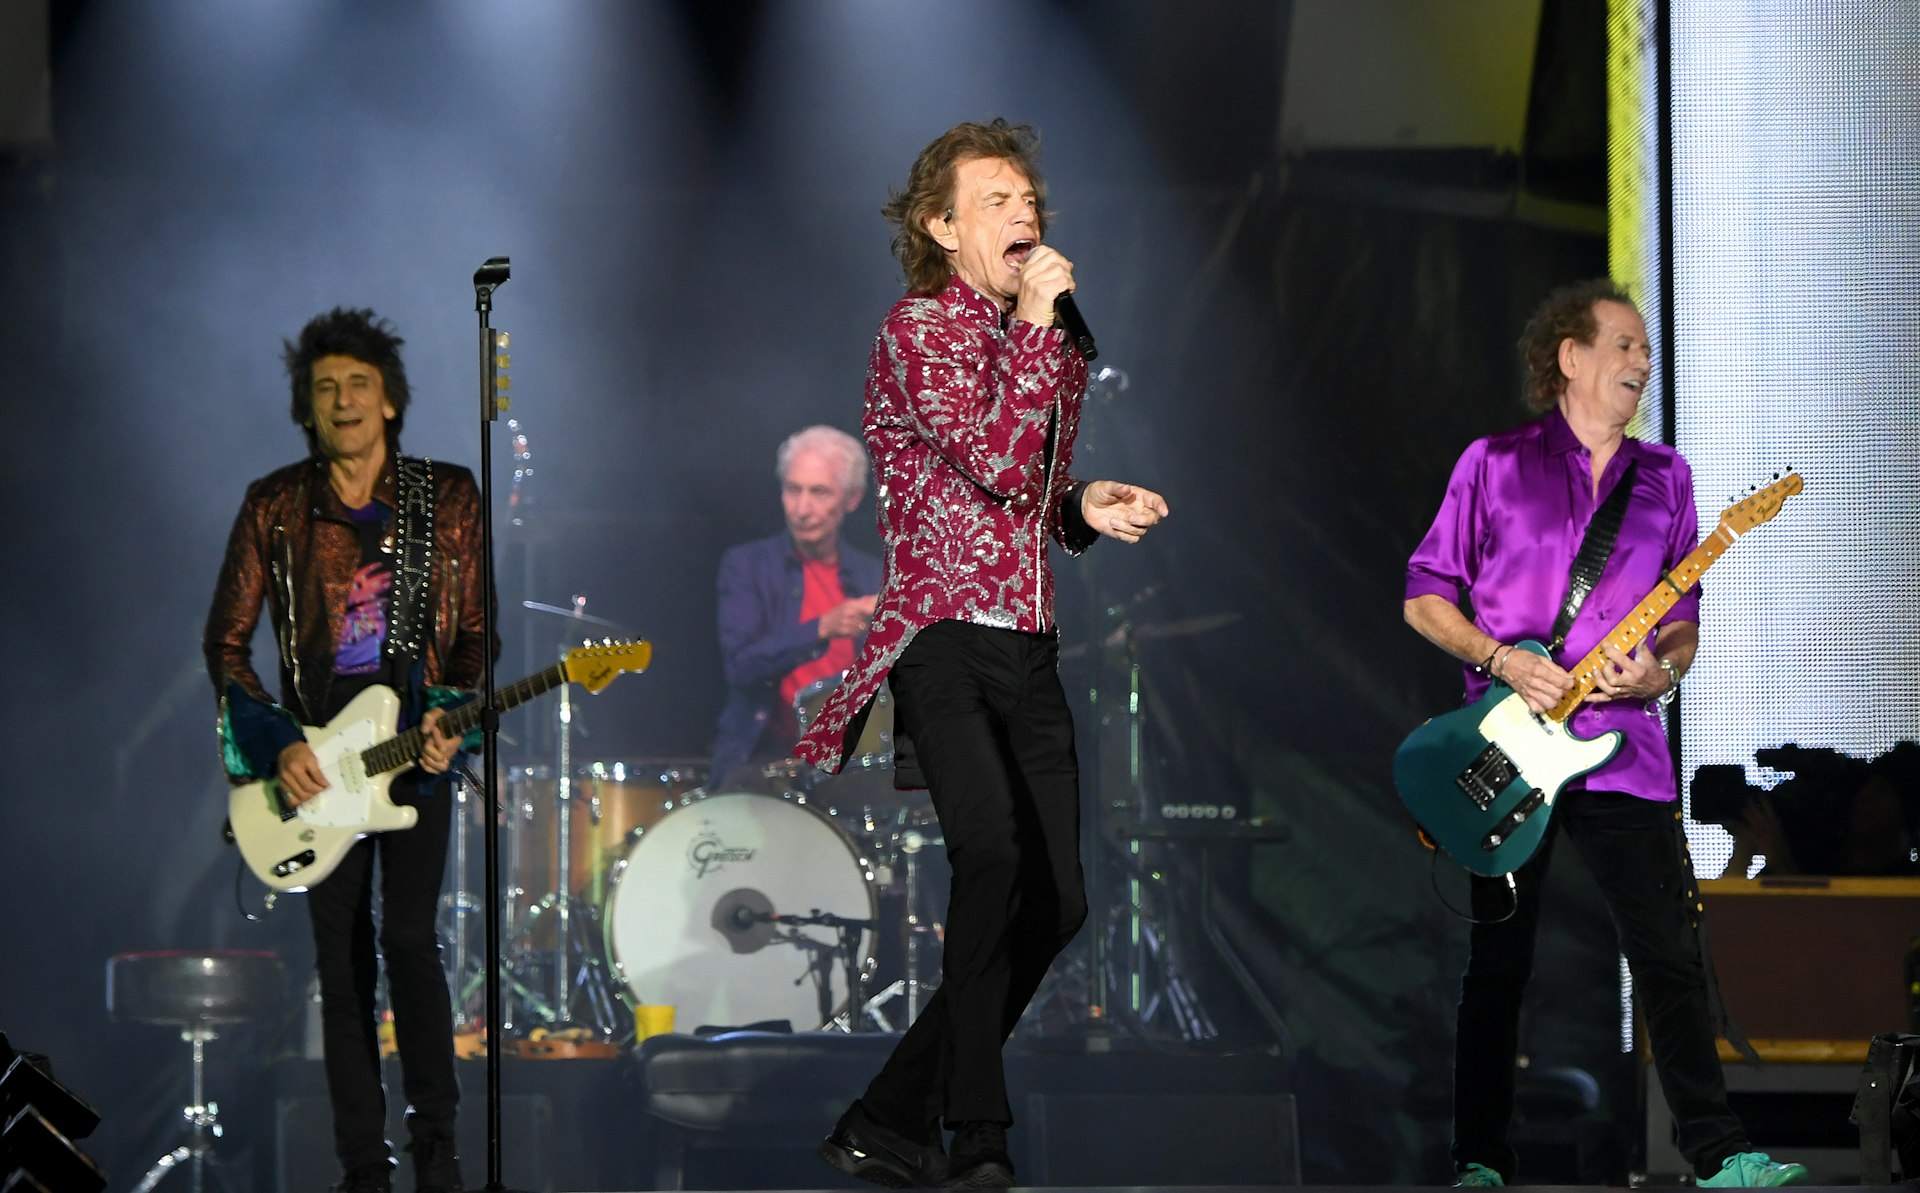 Charlie Watts, ROnnie Wood, Mick Jagger, and Keith Richards play live on the Rolling Stones' No Filter tour in 2019